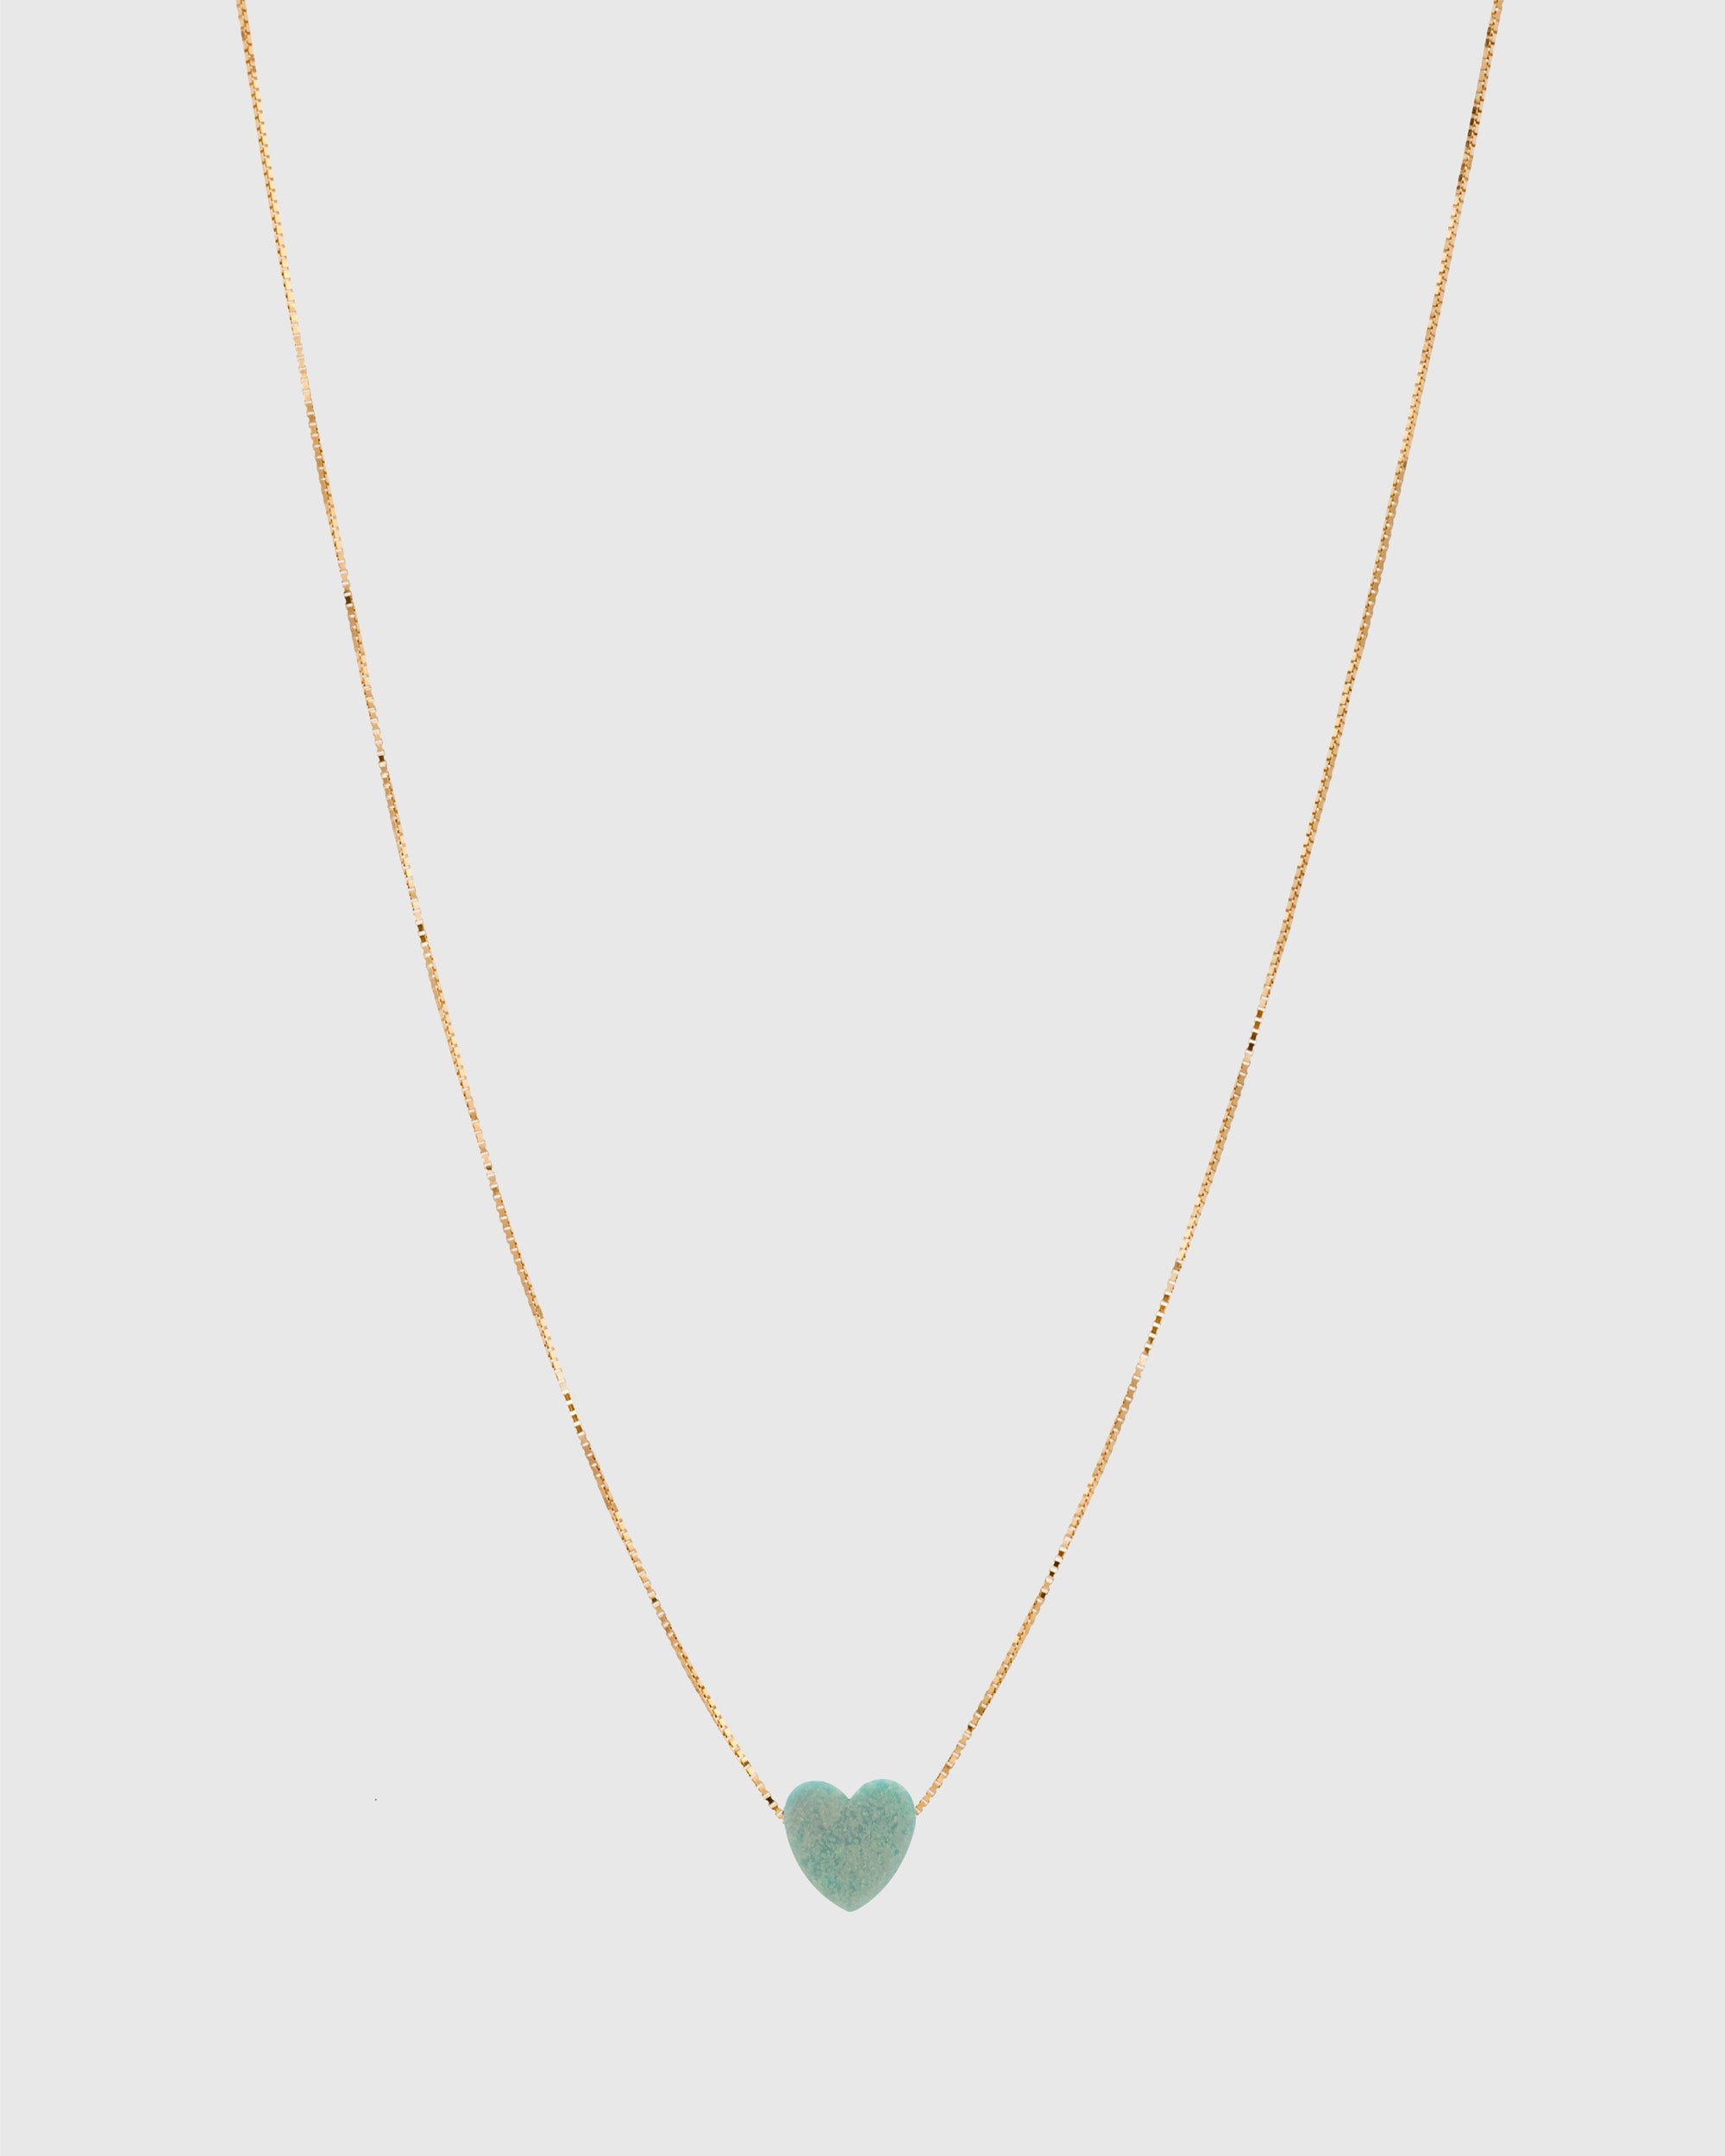 Teal Opal Heart Necklace